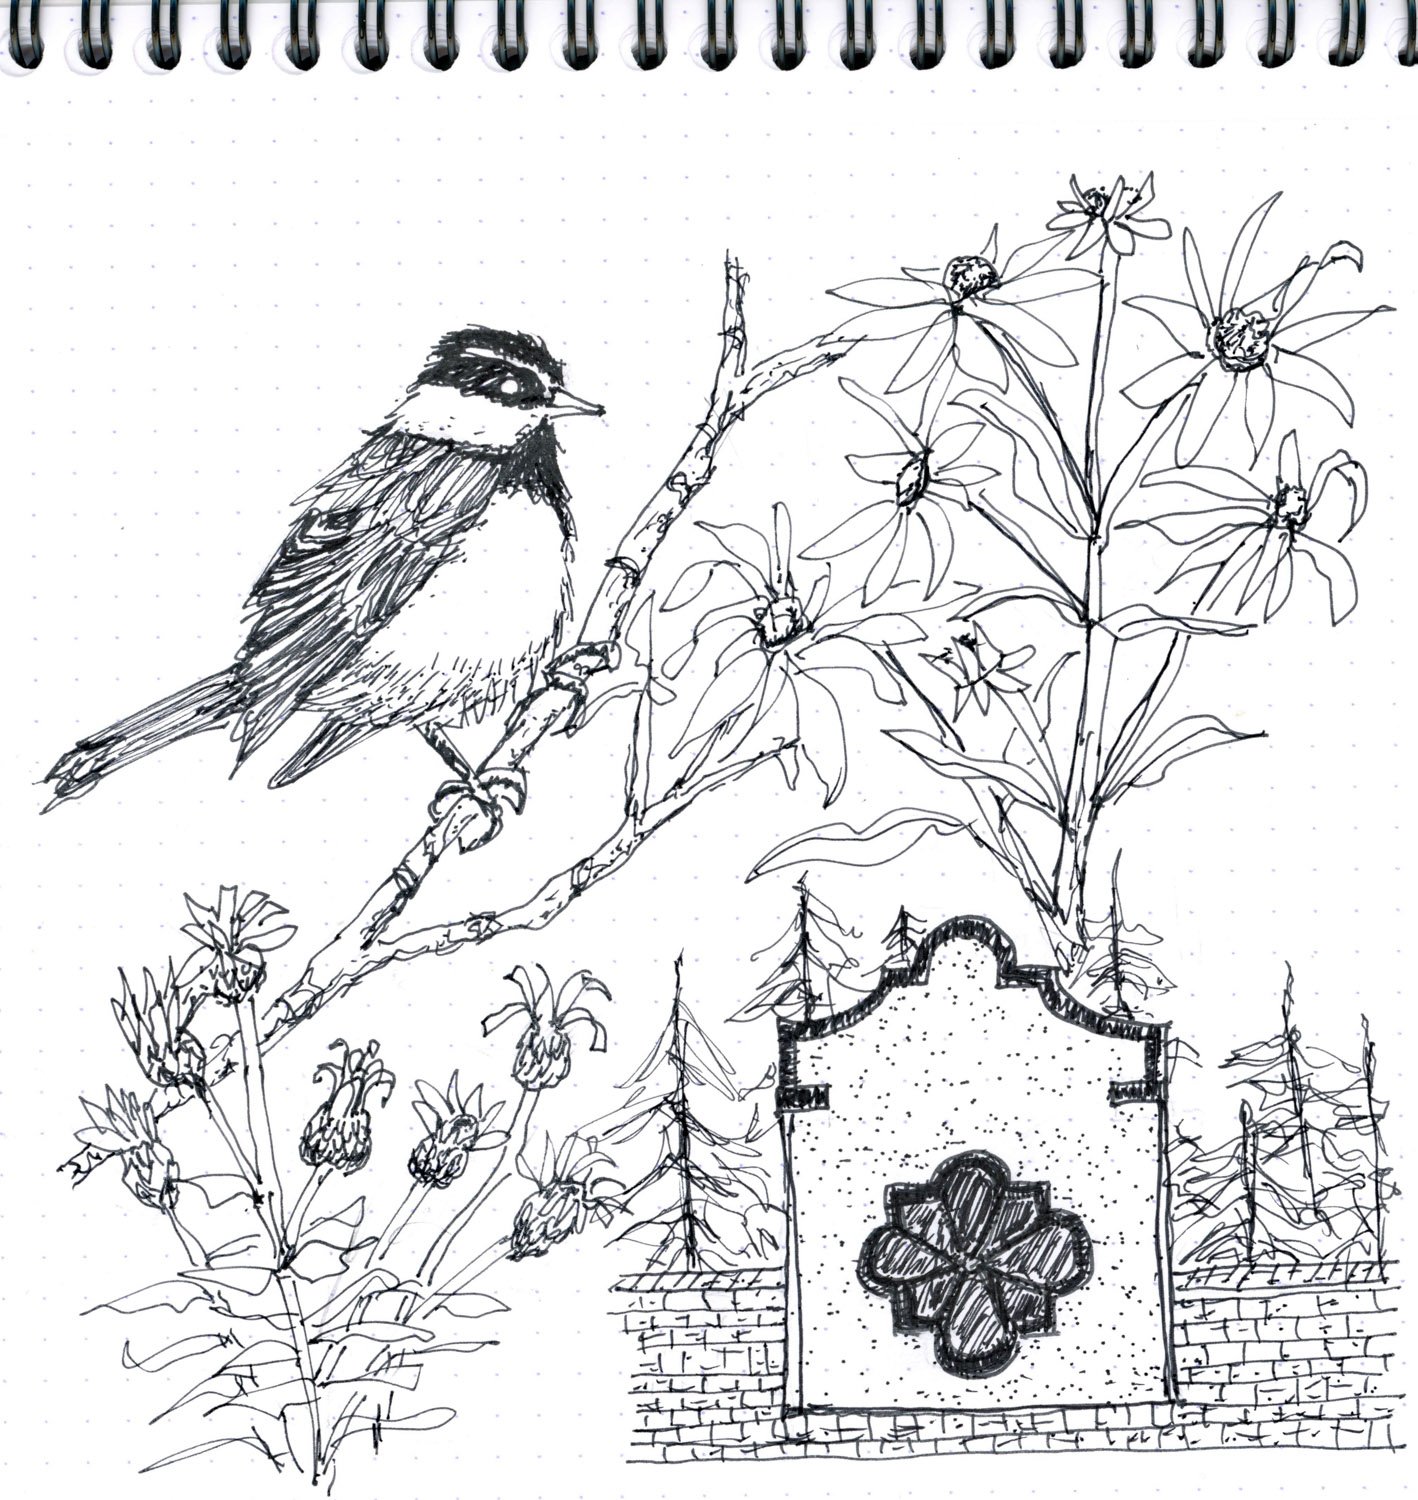 Nature Journal Drawings, Stephanie Sipp, Drawing Lessons, Black Mountain NC (7 of 19).JPG